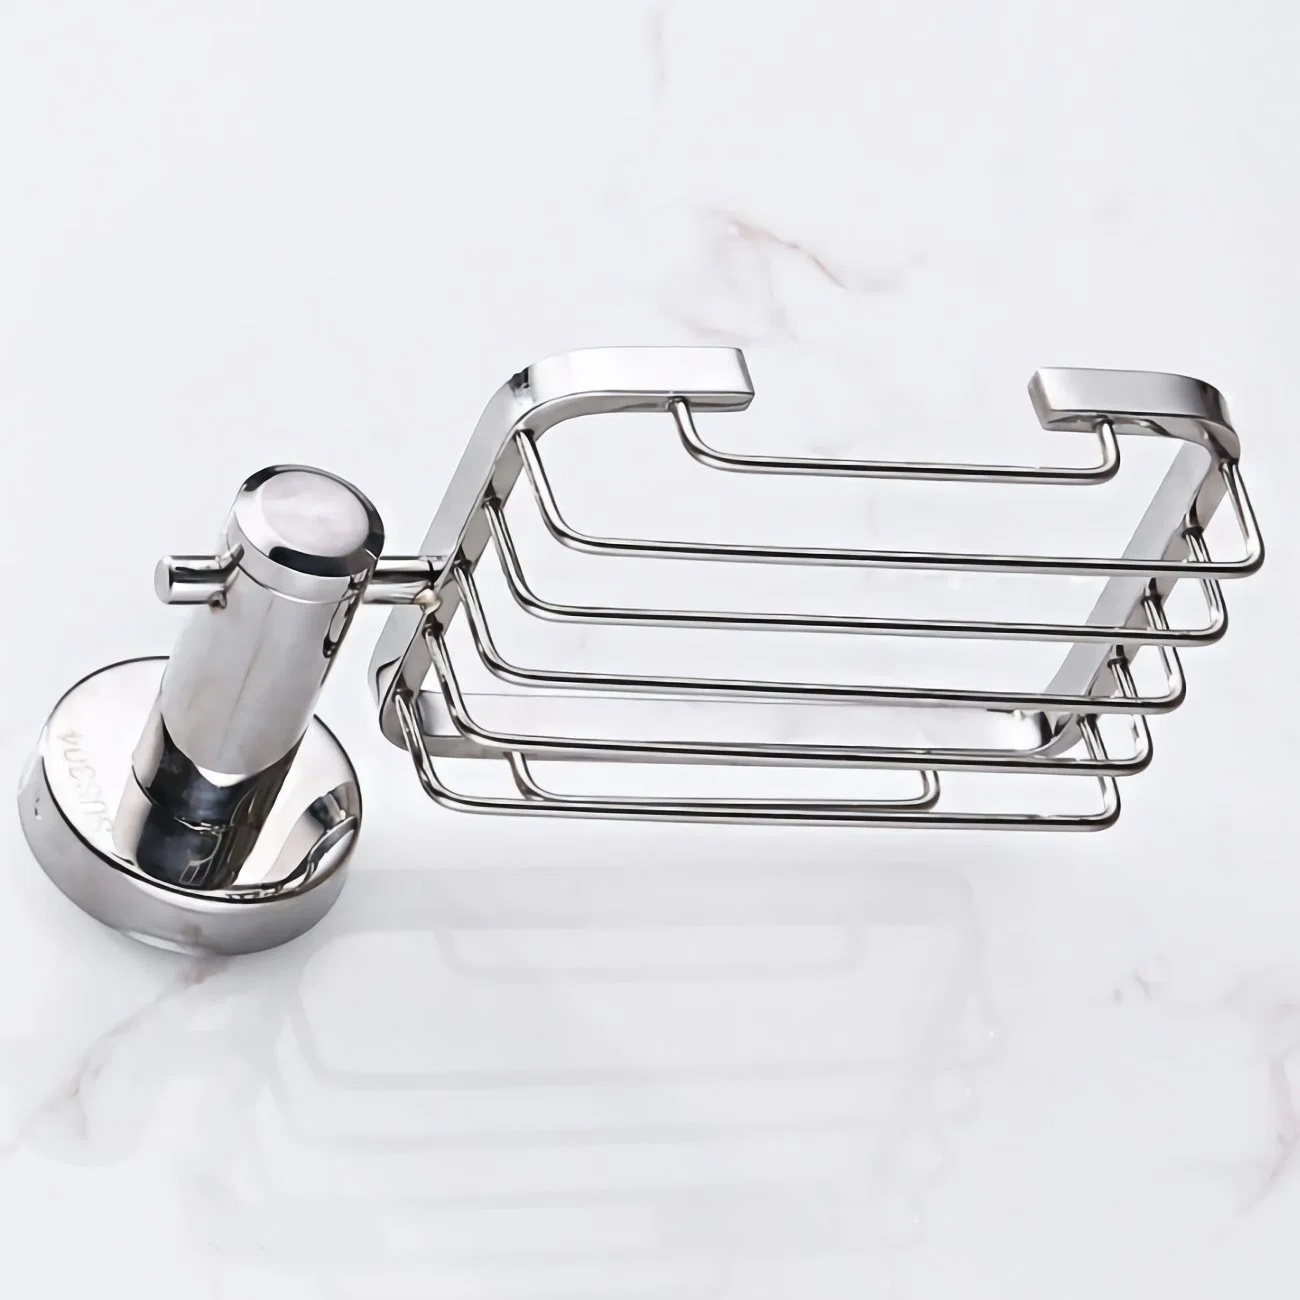 Stainless Steel Wall Mounted Bathroom Soap Dishes